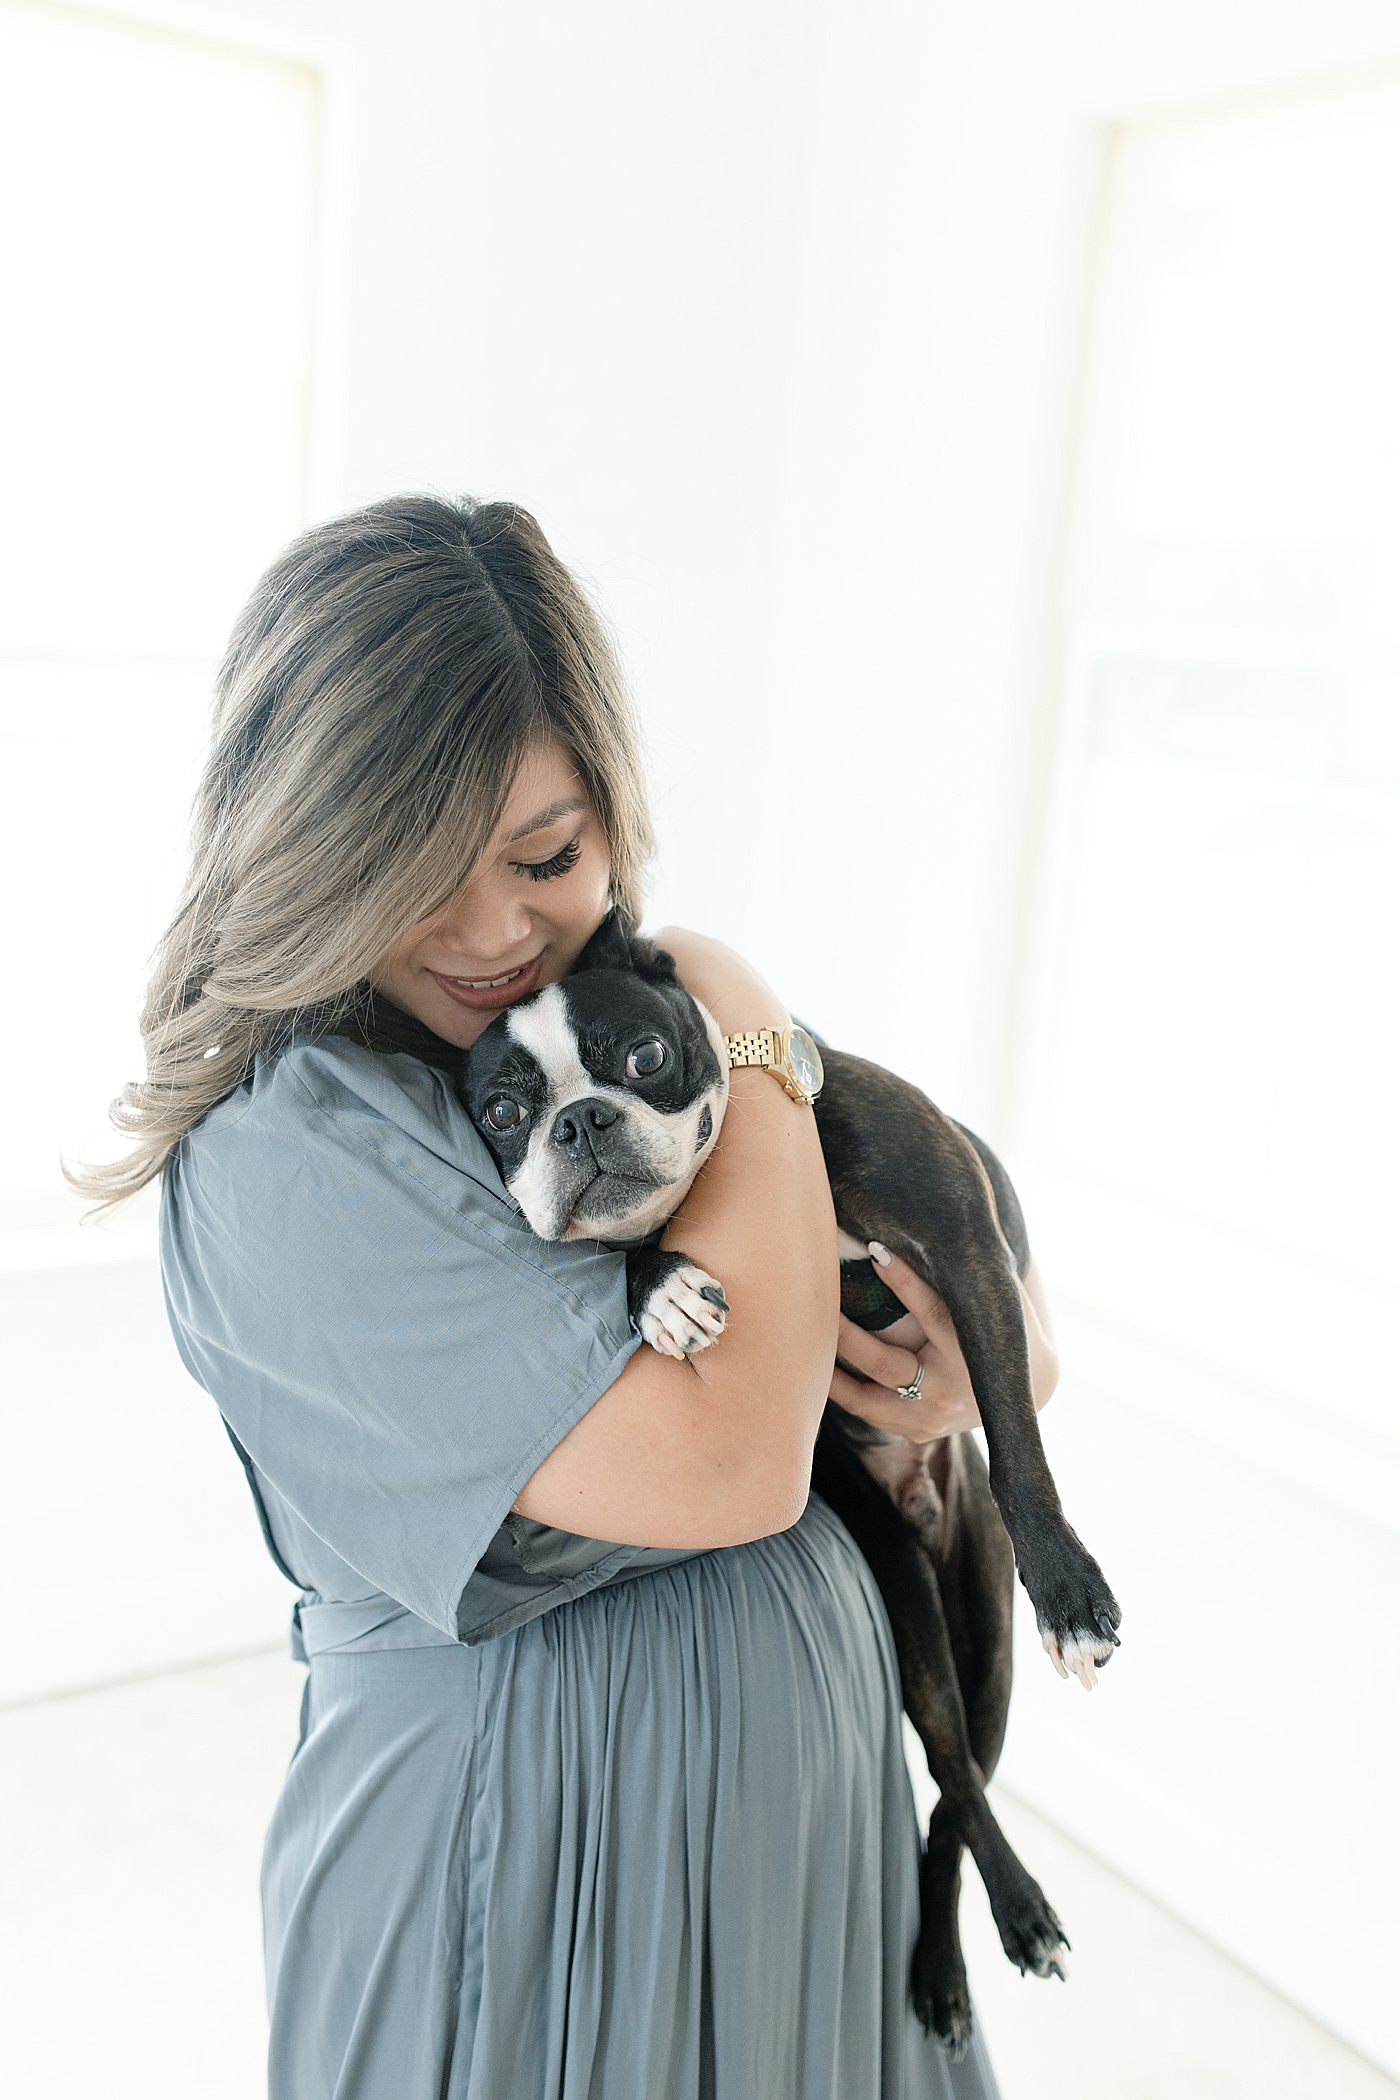 Mom to be snuggling black and white dog | Photo by MS Gulf Coast Photographer Little Sunshine Photography 